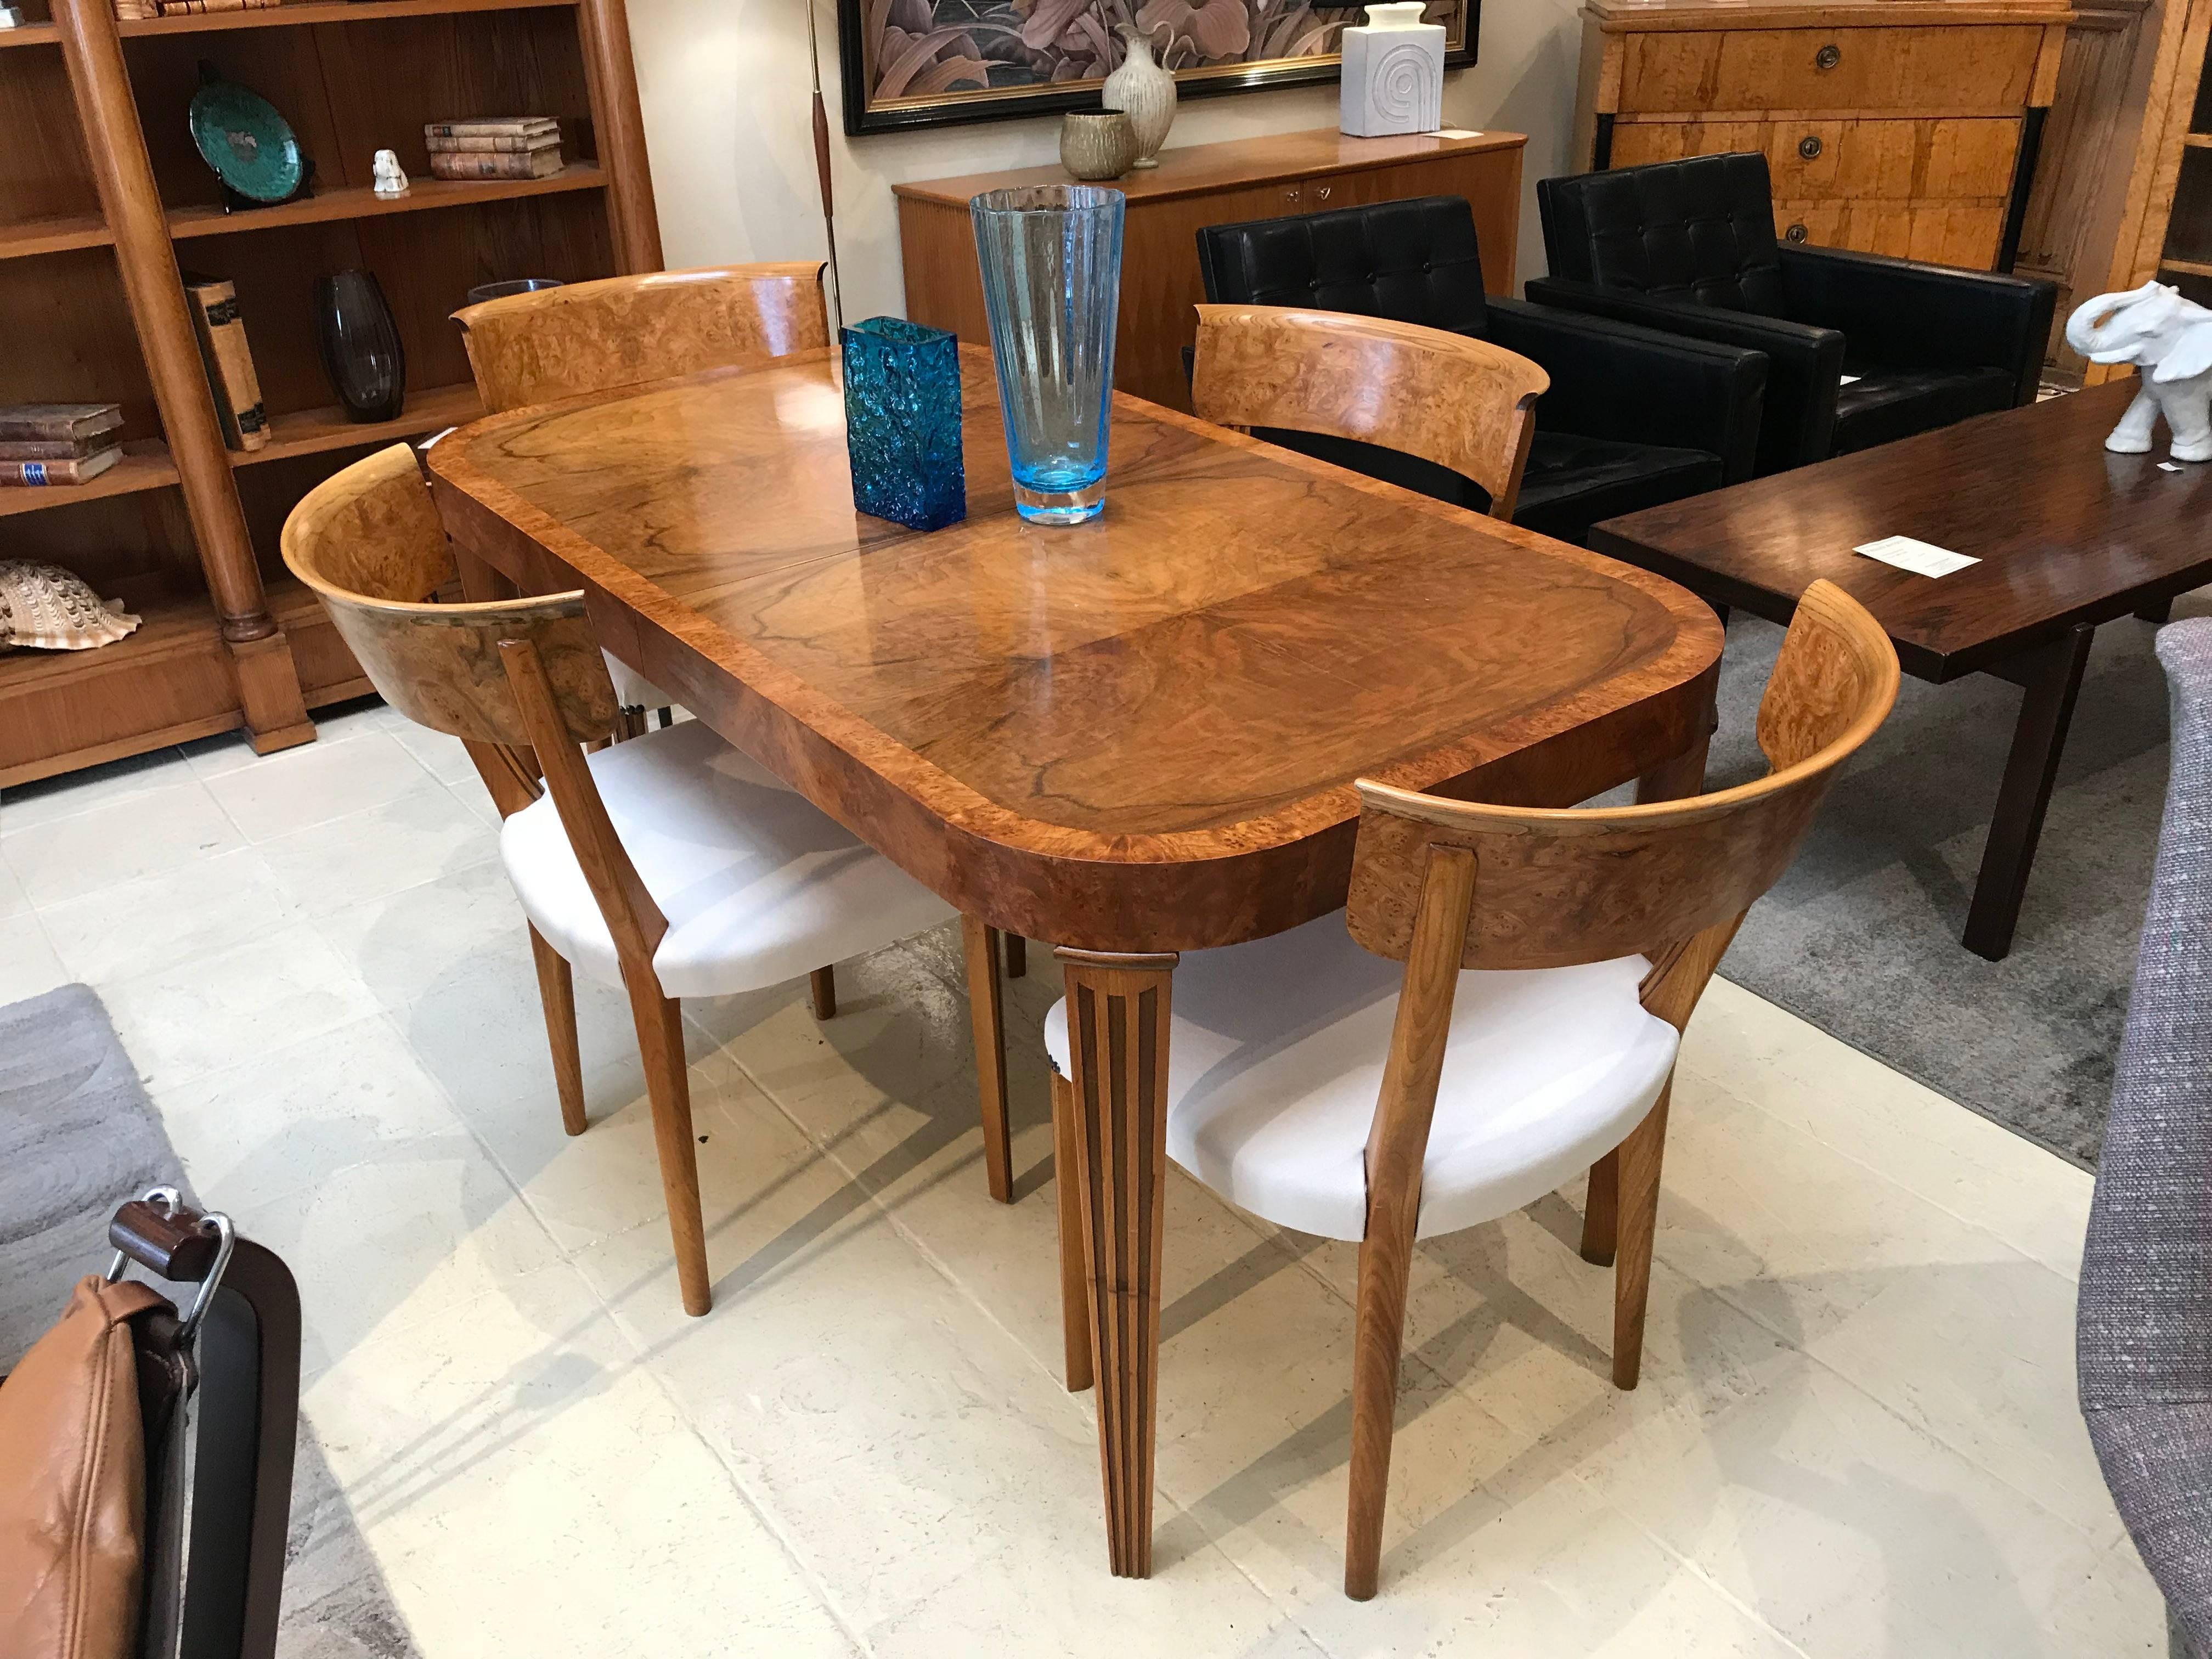 Art Deco elm and burr elm dining table with reeded legs. The table has two plain extension leaves to seat eight. The colour and burl of the timber is superb. There are four matching Clismos dining chairs which have been reupholstered in a macro sued